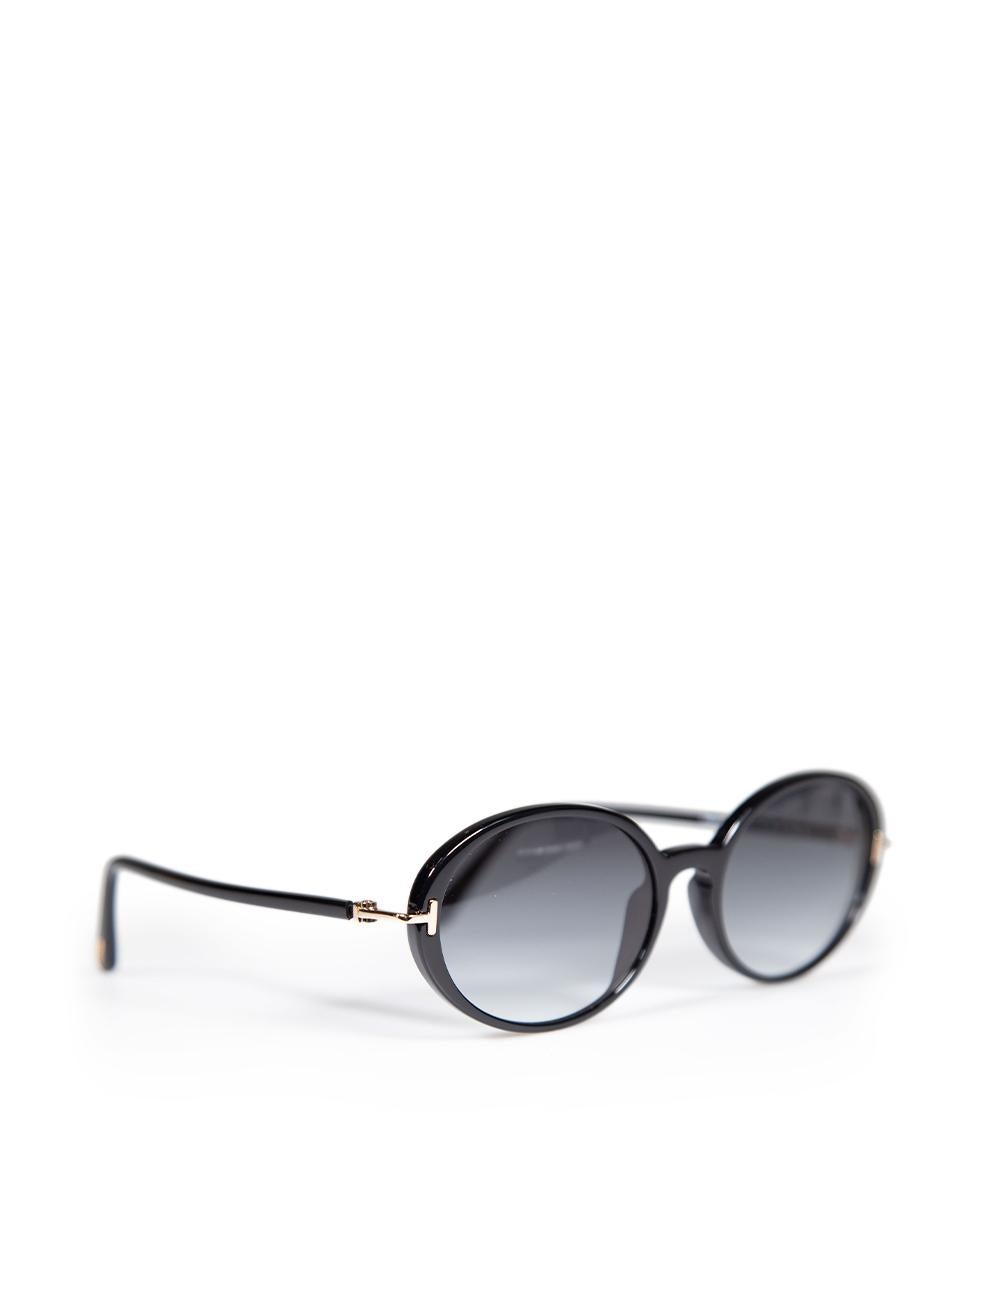 Tom Ford Shiny Black Raquel Oval Sunglasses In New Condition For Sale In London, GB